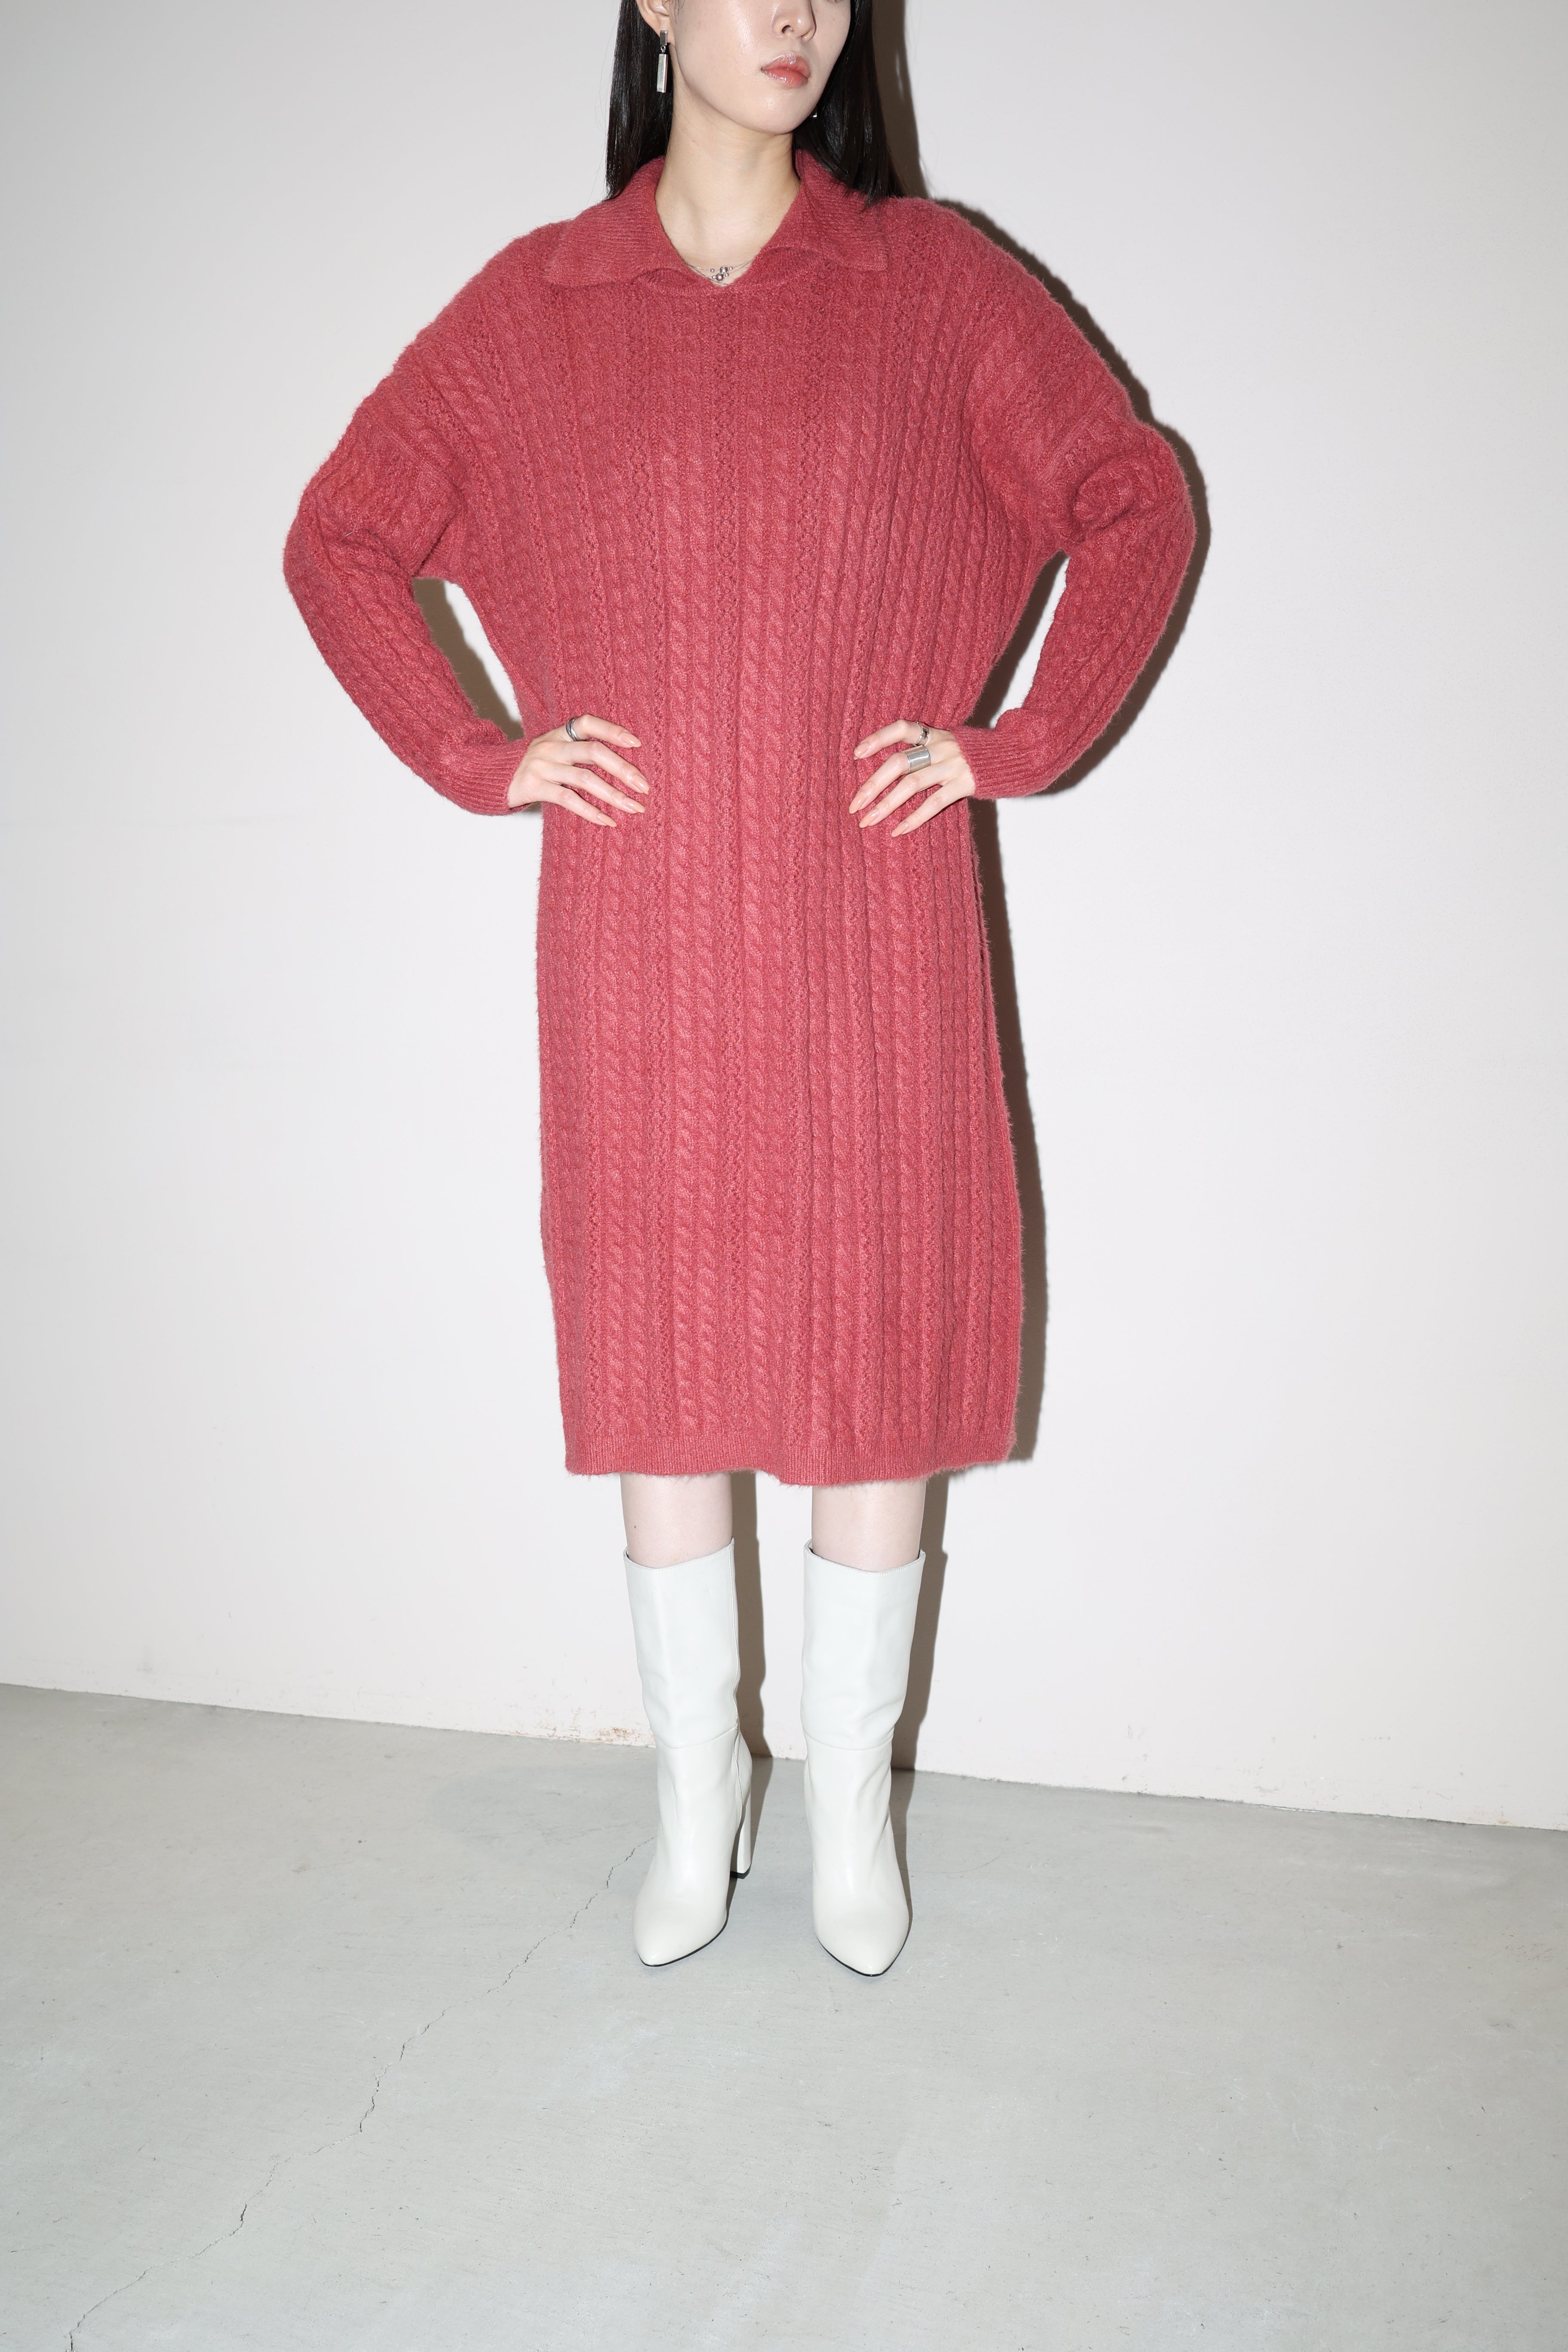 CHRISTIAN DIOR cashmere cable knit polo dress